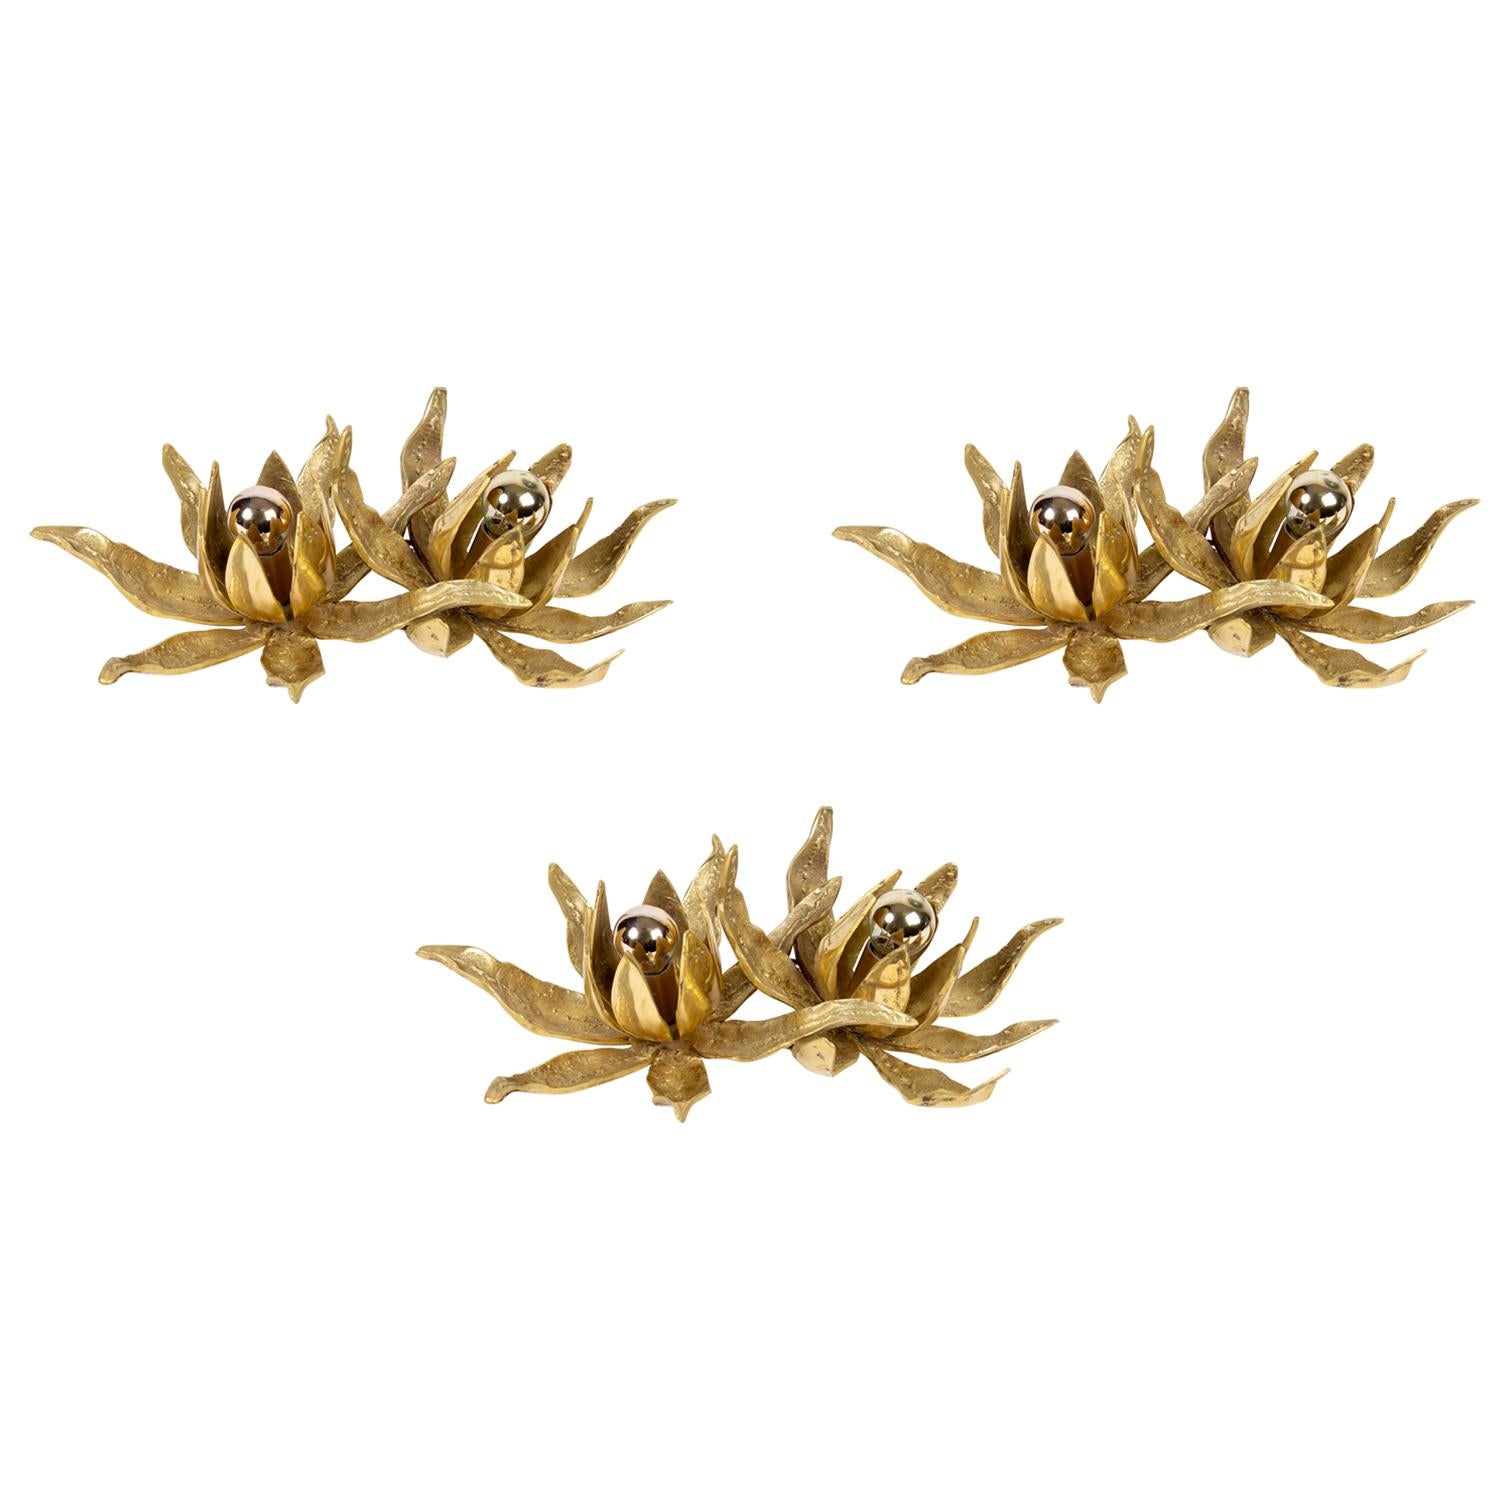 Paul Moerenhout set of three double sconces designed in the 1970s.
Made of solid gilded bronze, the 3 double sconces figure blossoming flowers in a Brutalist manner.
Nice piece of cast bronze.
Each sconces features 2 bulbs.

Measures: Height 32